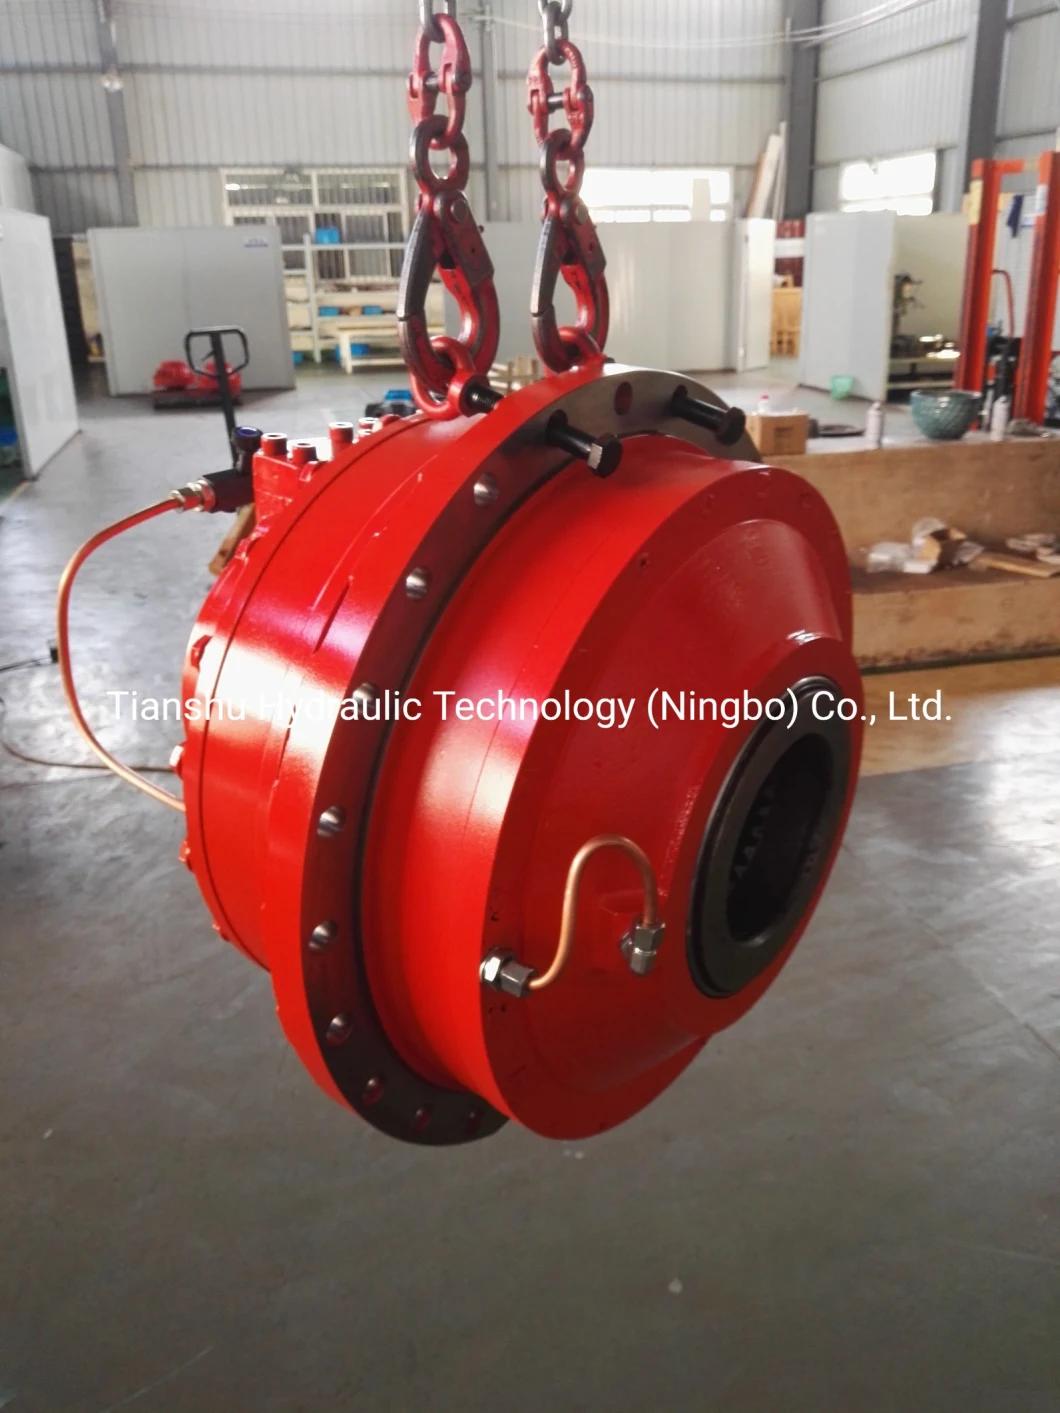 Chinamade Hagglunds Drives System Ca Series Low Speed High Torque Radial Piston Hydraulic Motor for Sale